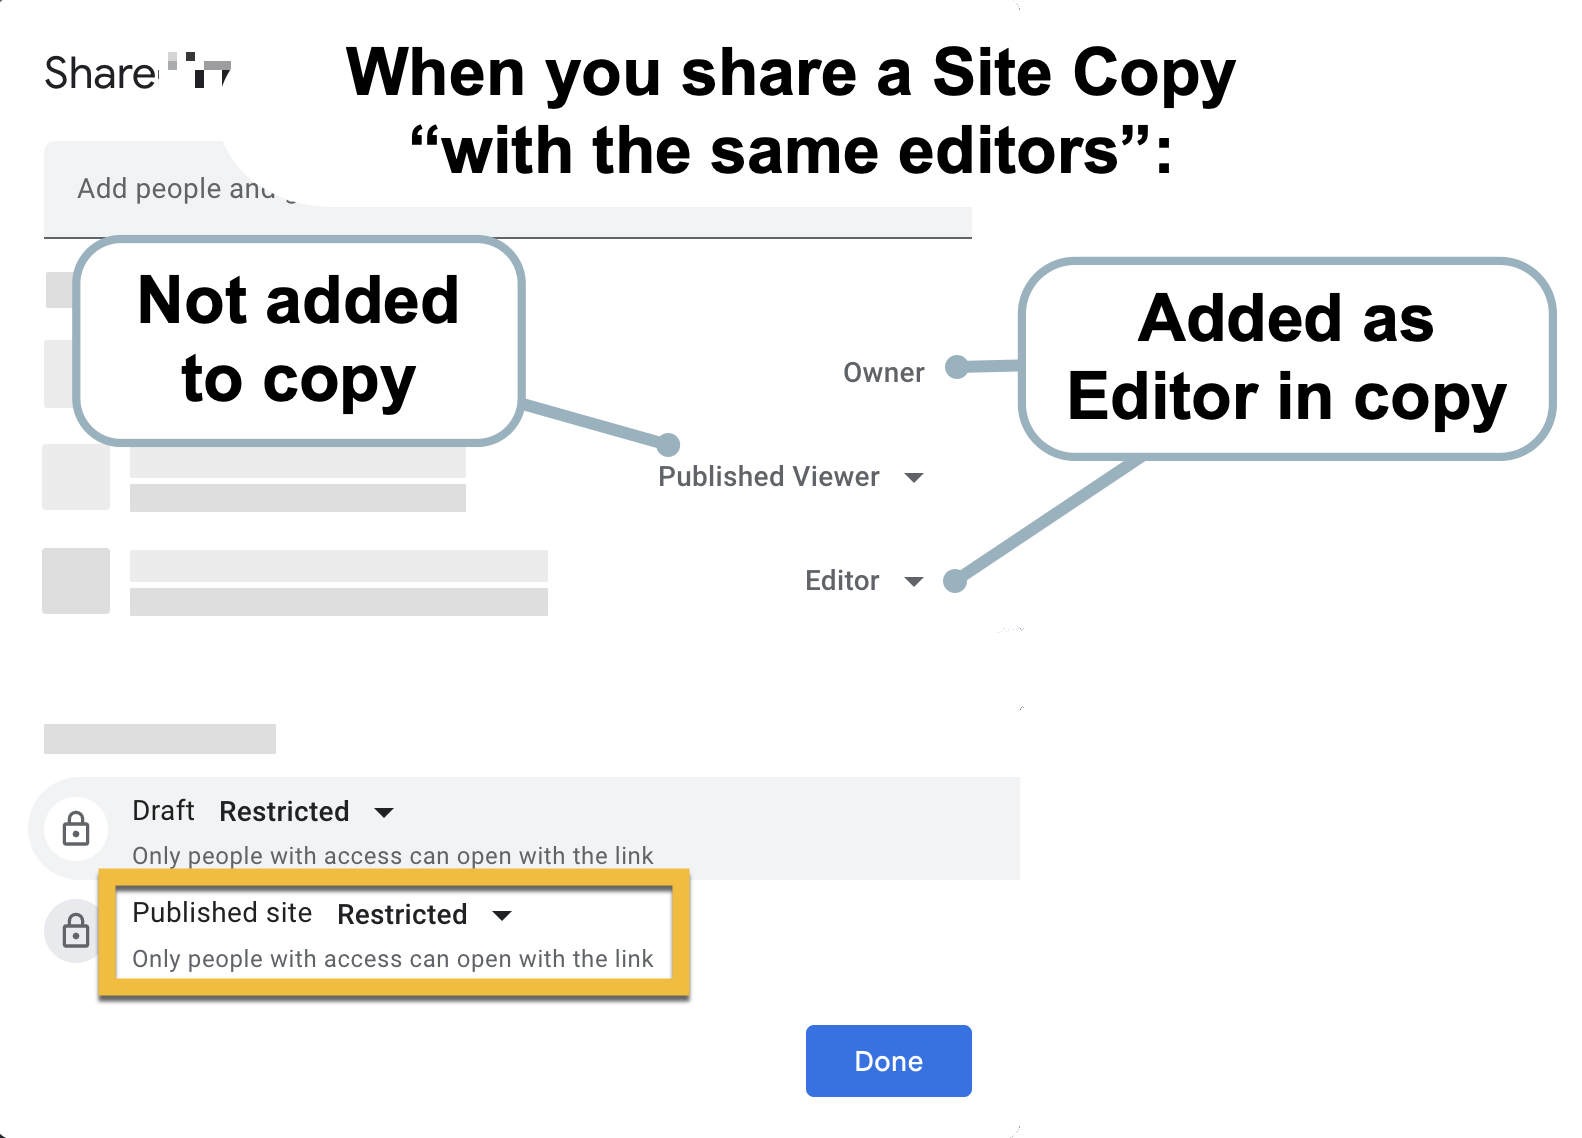 Google sites sharing screen showing owner and editor are added to site copies as Editors; those with published viewer access are not added